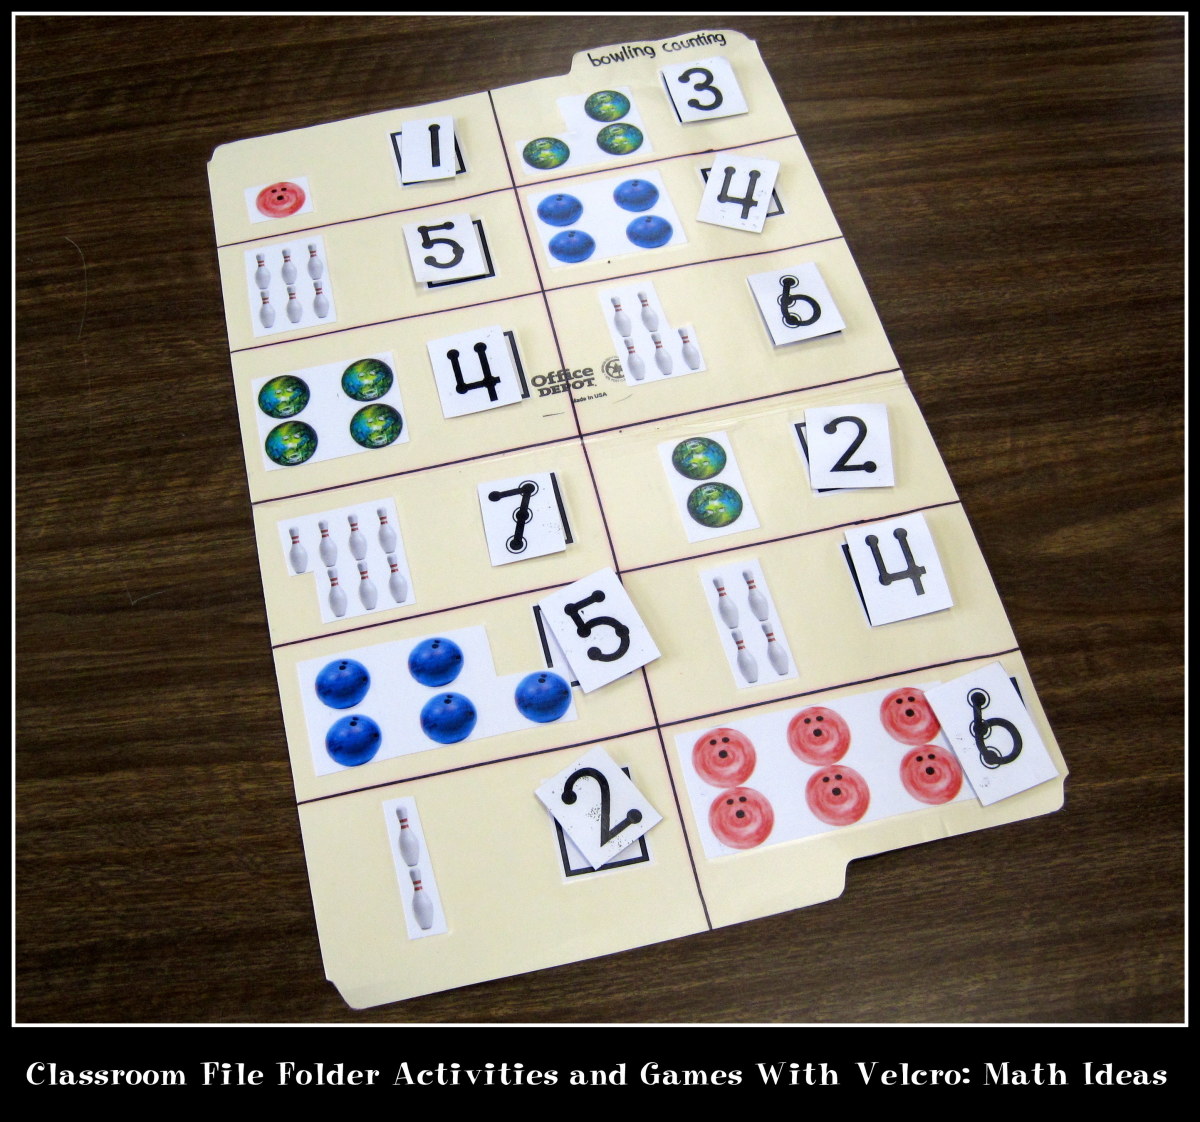 Classroom File Folder Activities and Games With Velcro: Math Ideas